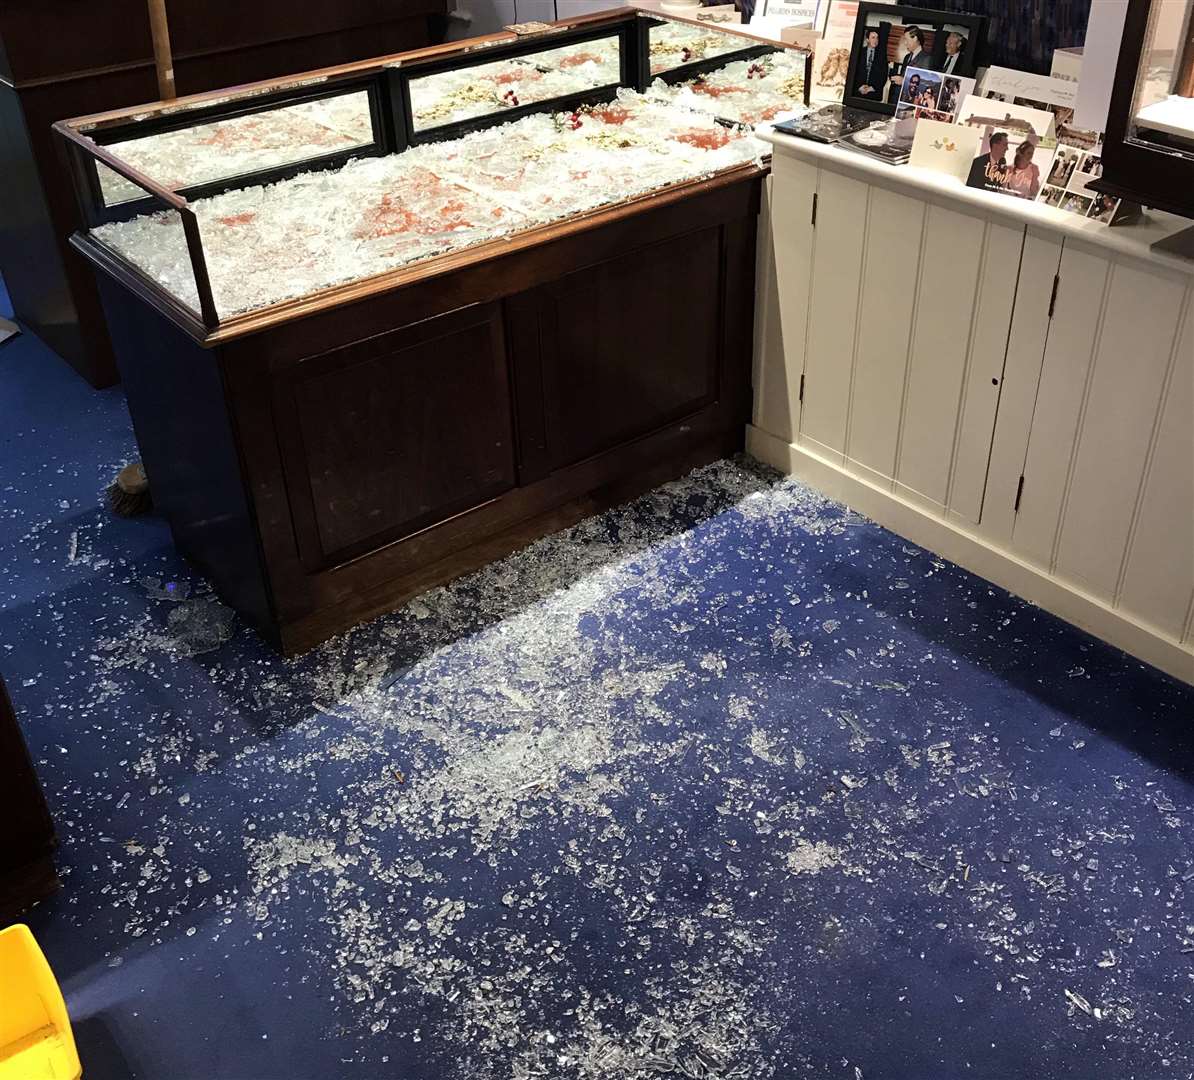 The aftermath of the smash and grab raid (6164950)